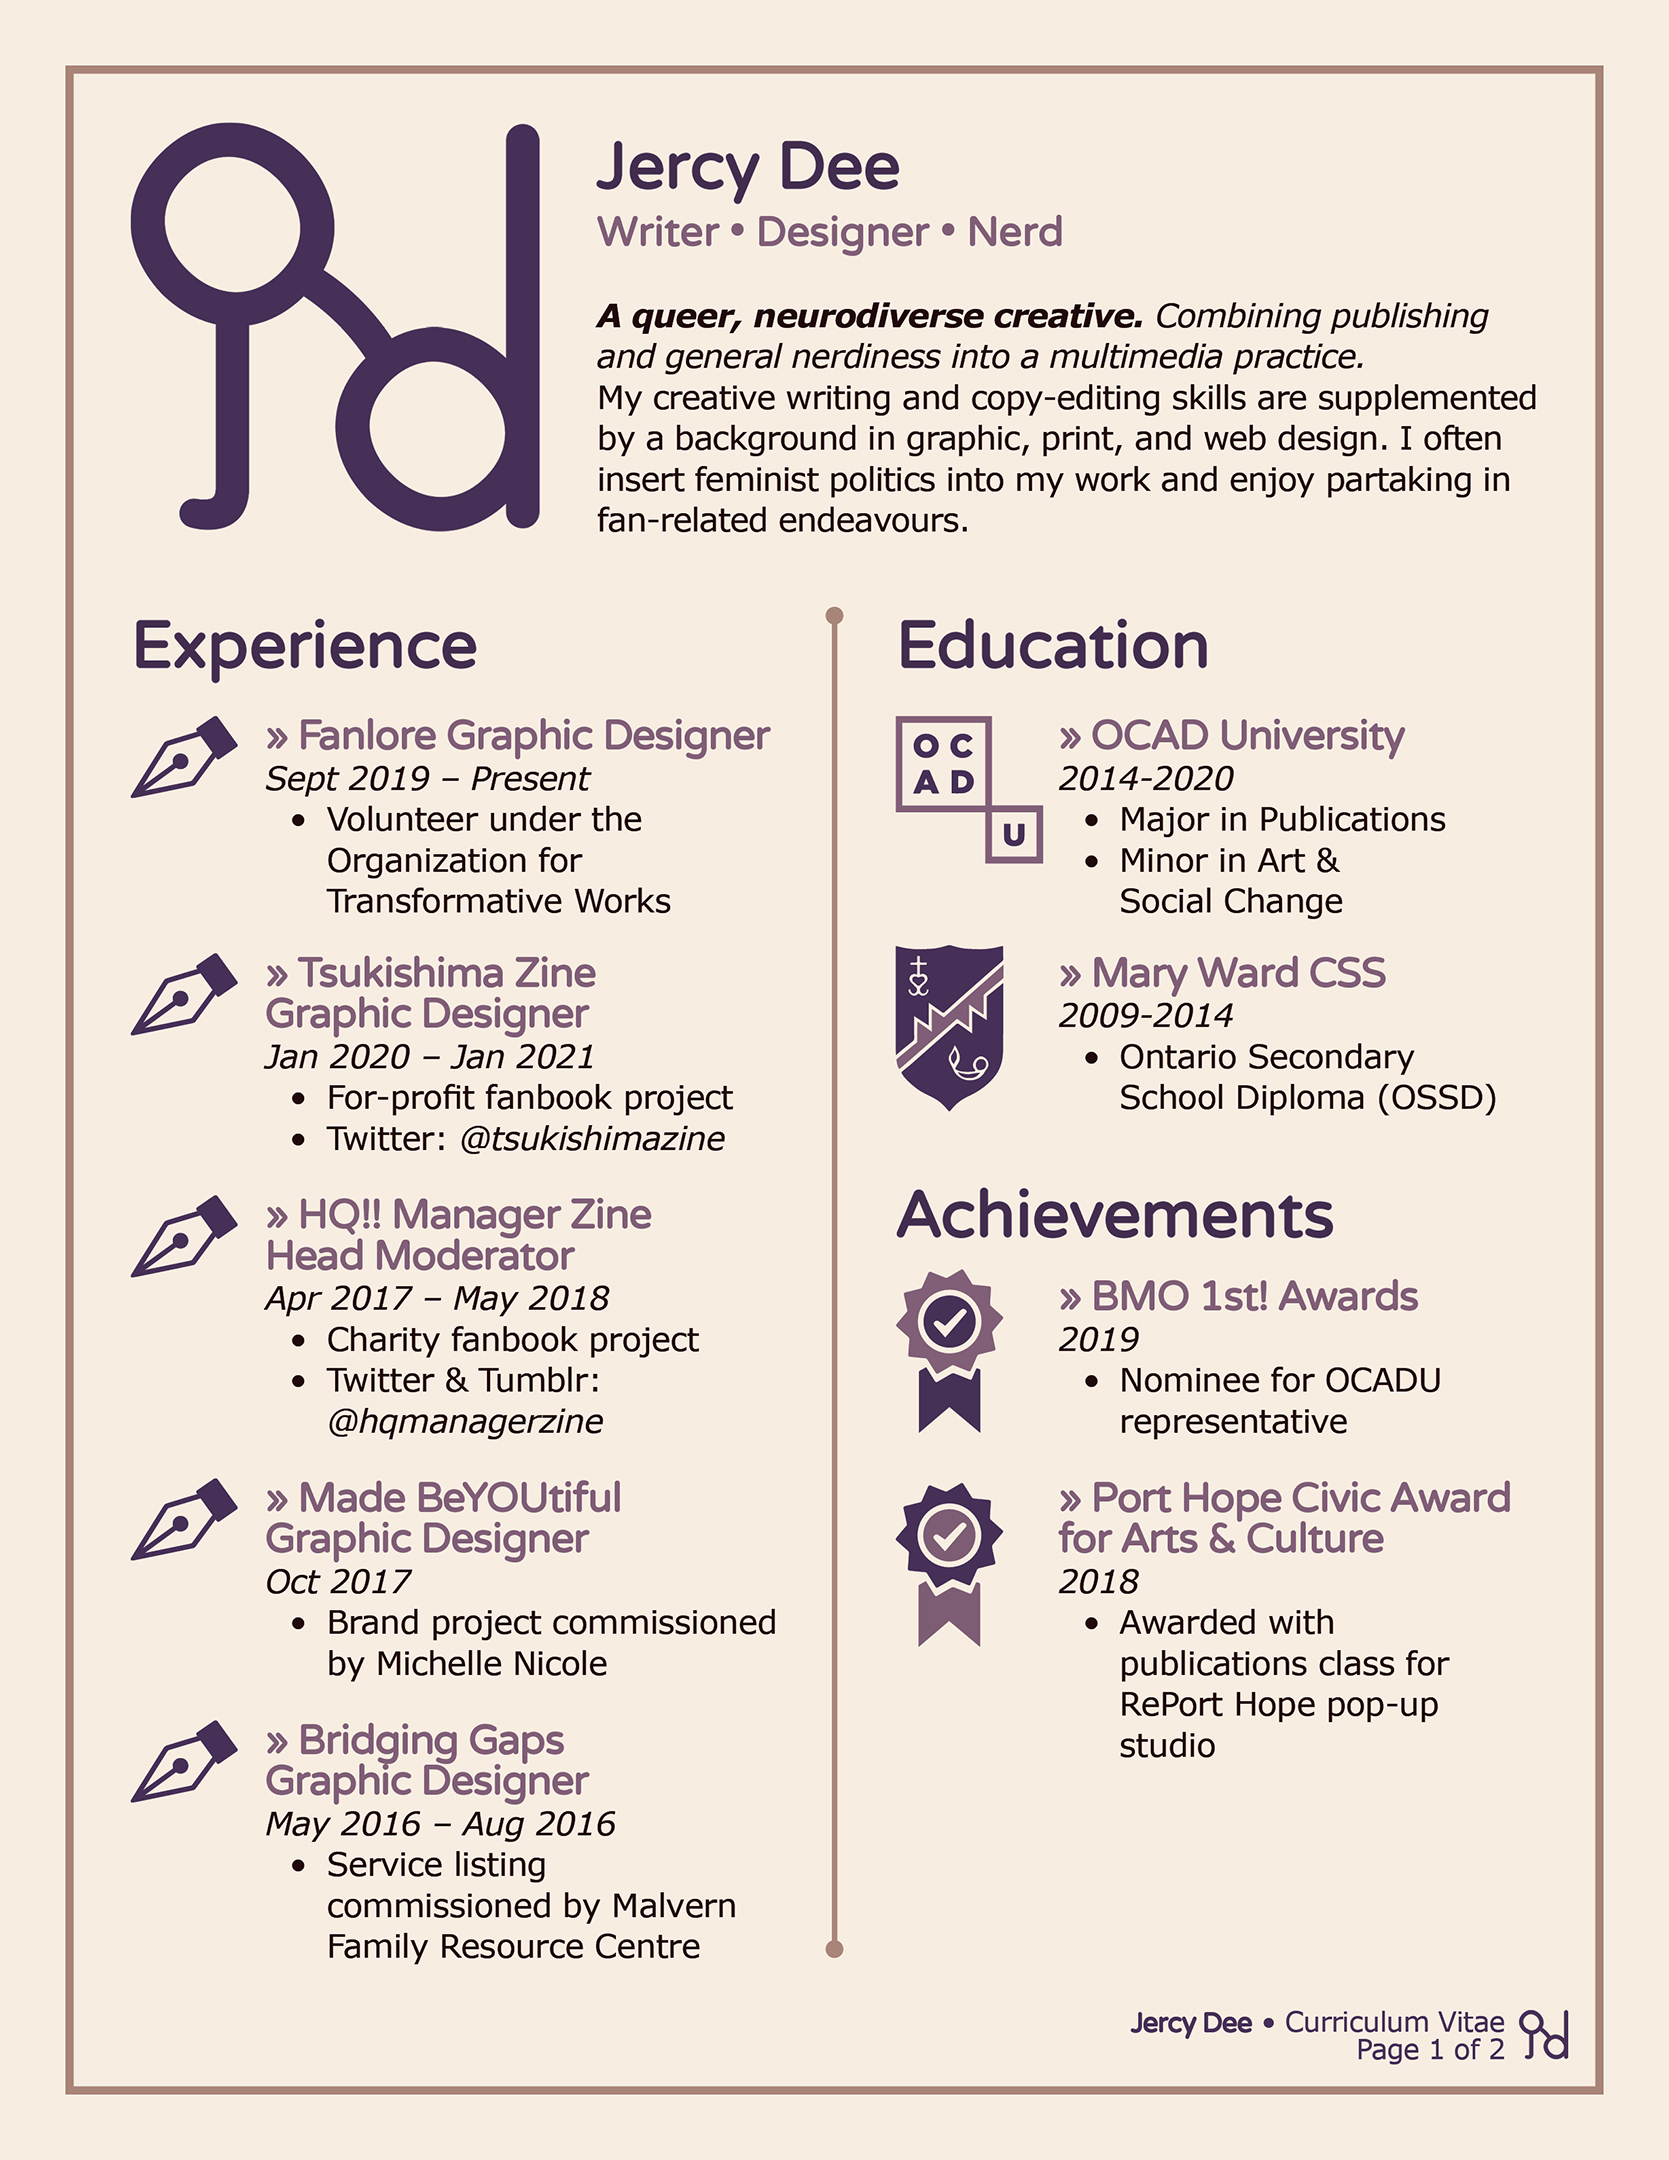 Page 1 of a design-based CV using my brand, which lists my name, objective, work experience, education, and achievements.